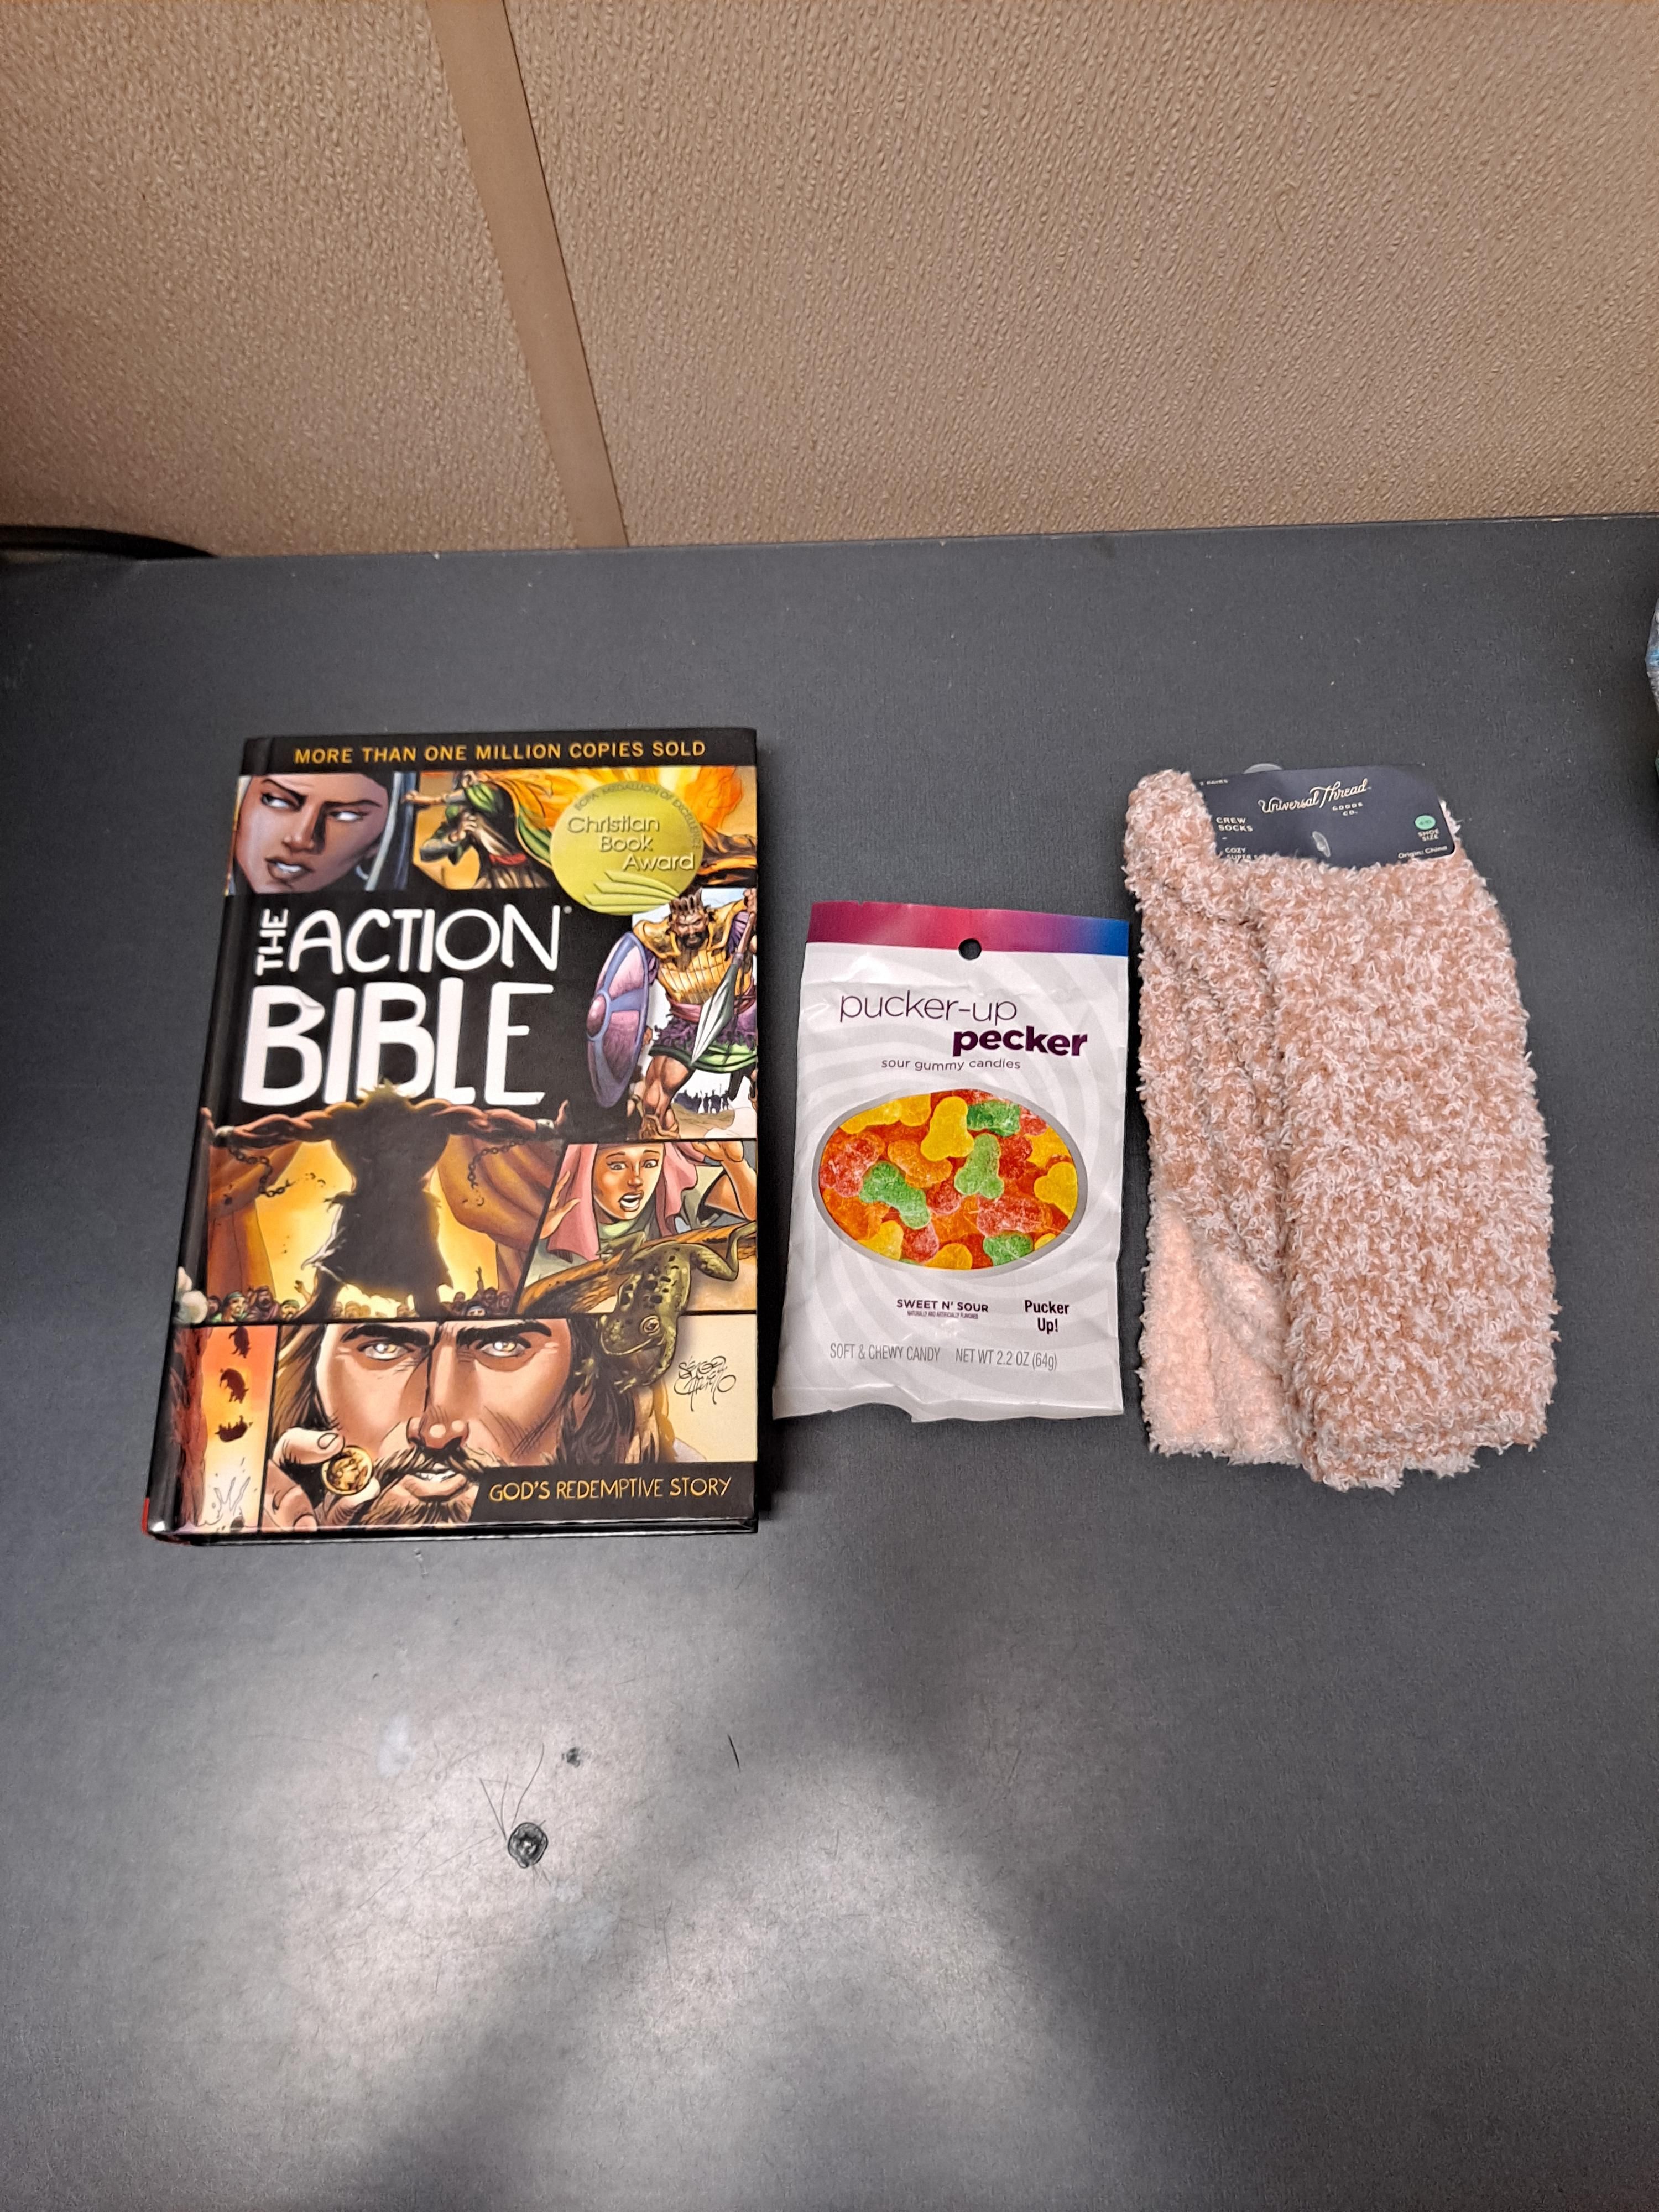 What do you think my secret Santa was trying to tell me?